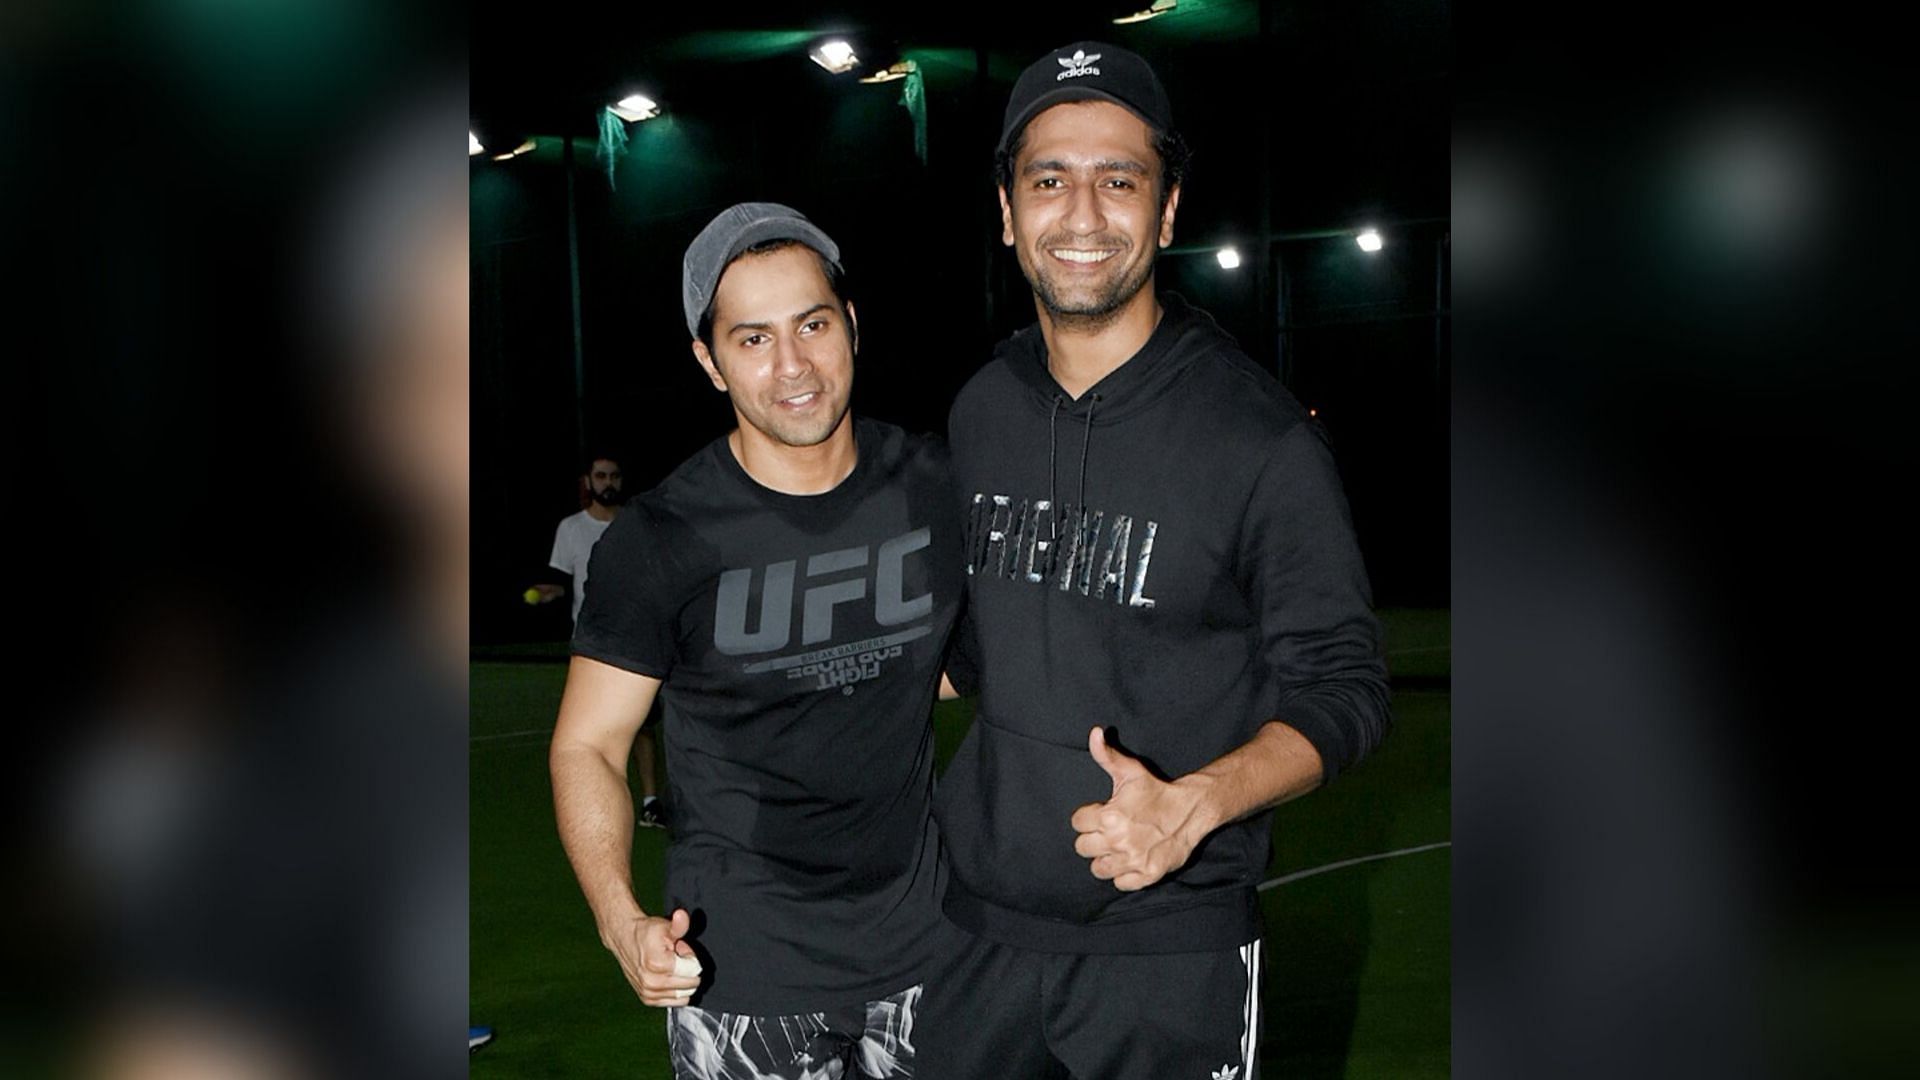 Varun Dhawan and Vicky Kaushal after a game of cricket in Mumbai.